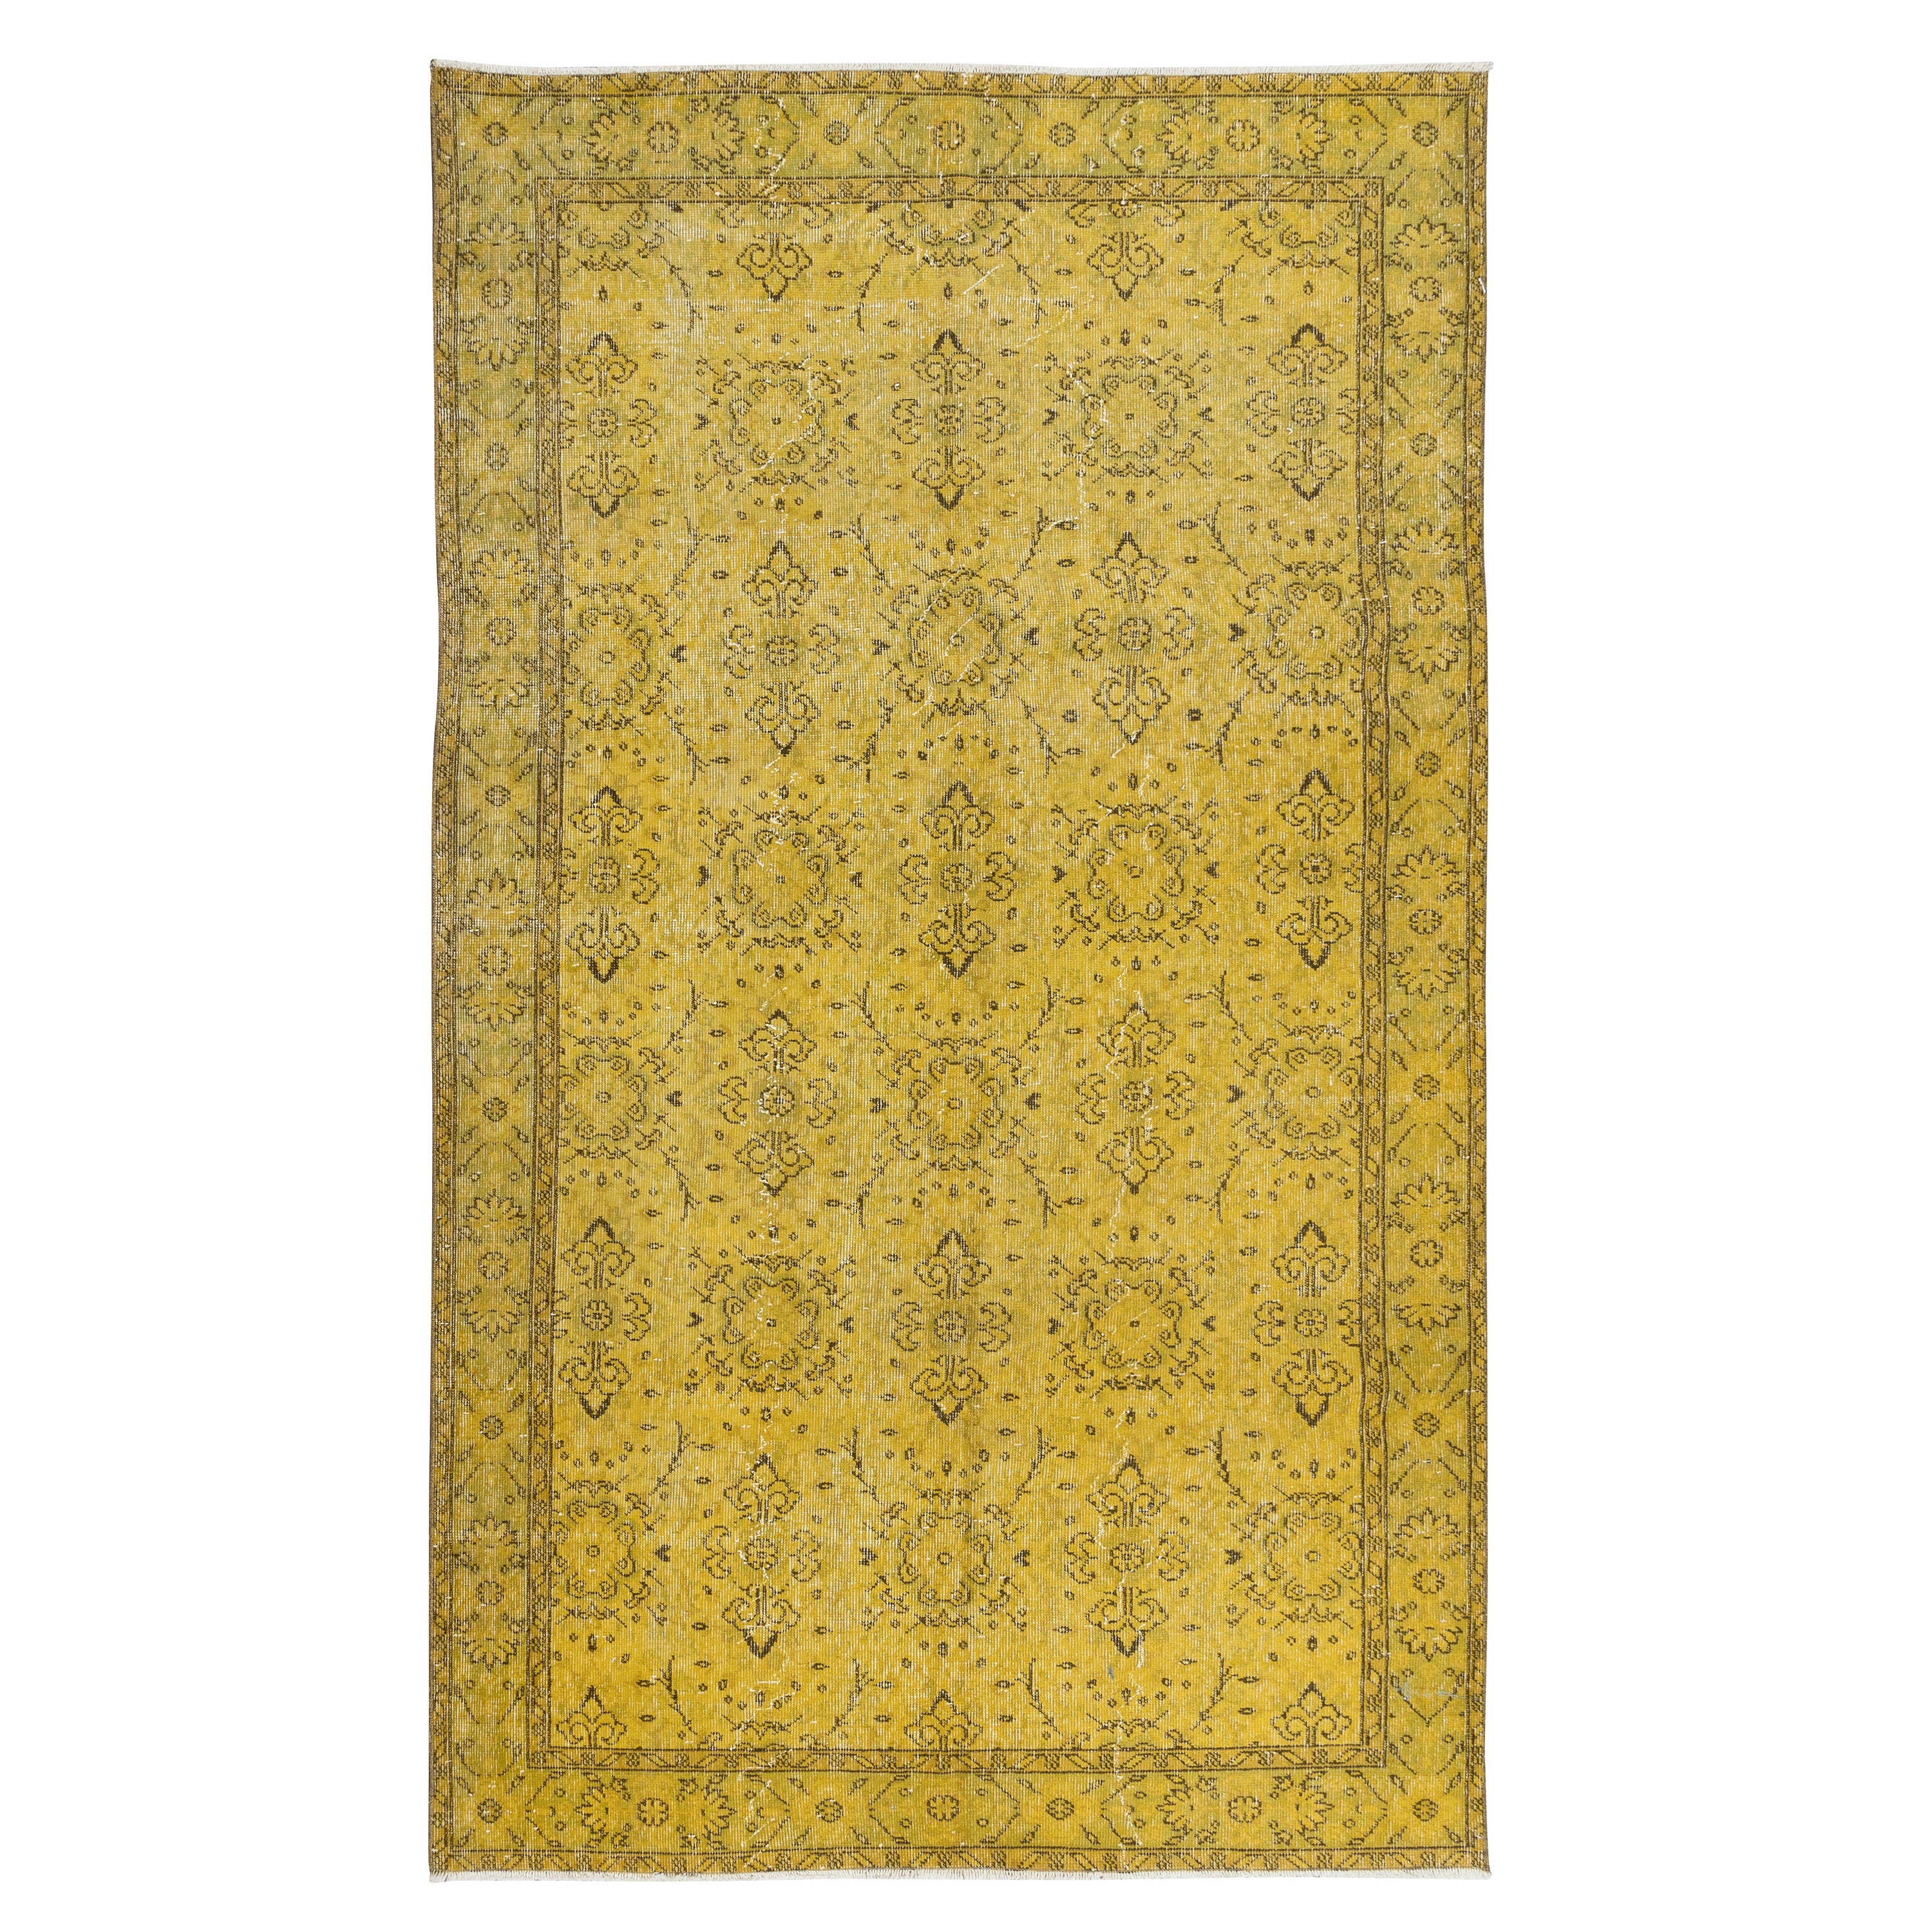 5.5x9.5 Ft Modern Handmade Floral Turkish Area Rug, Yellow Upcycled Carpet